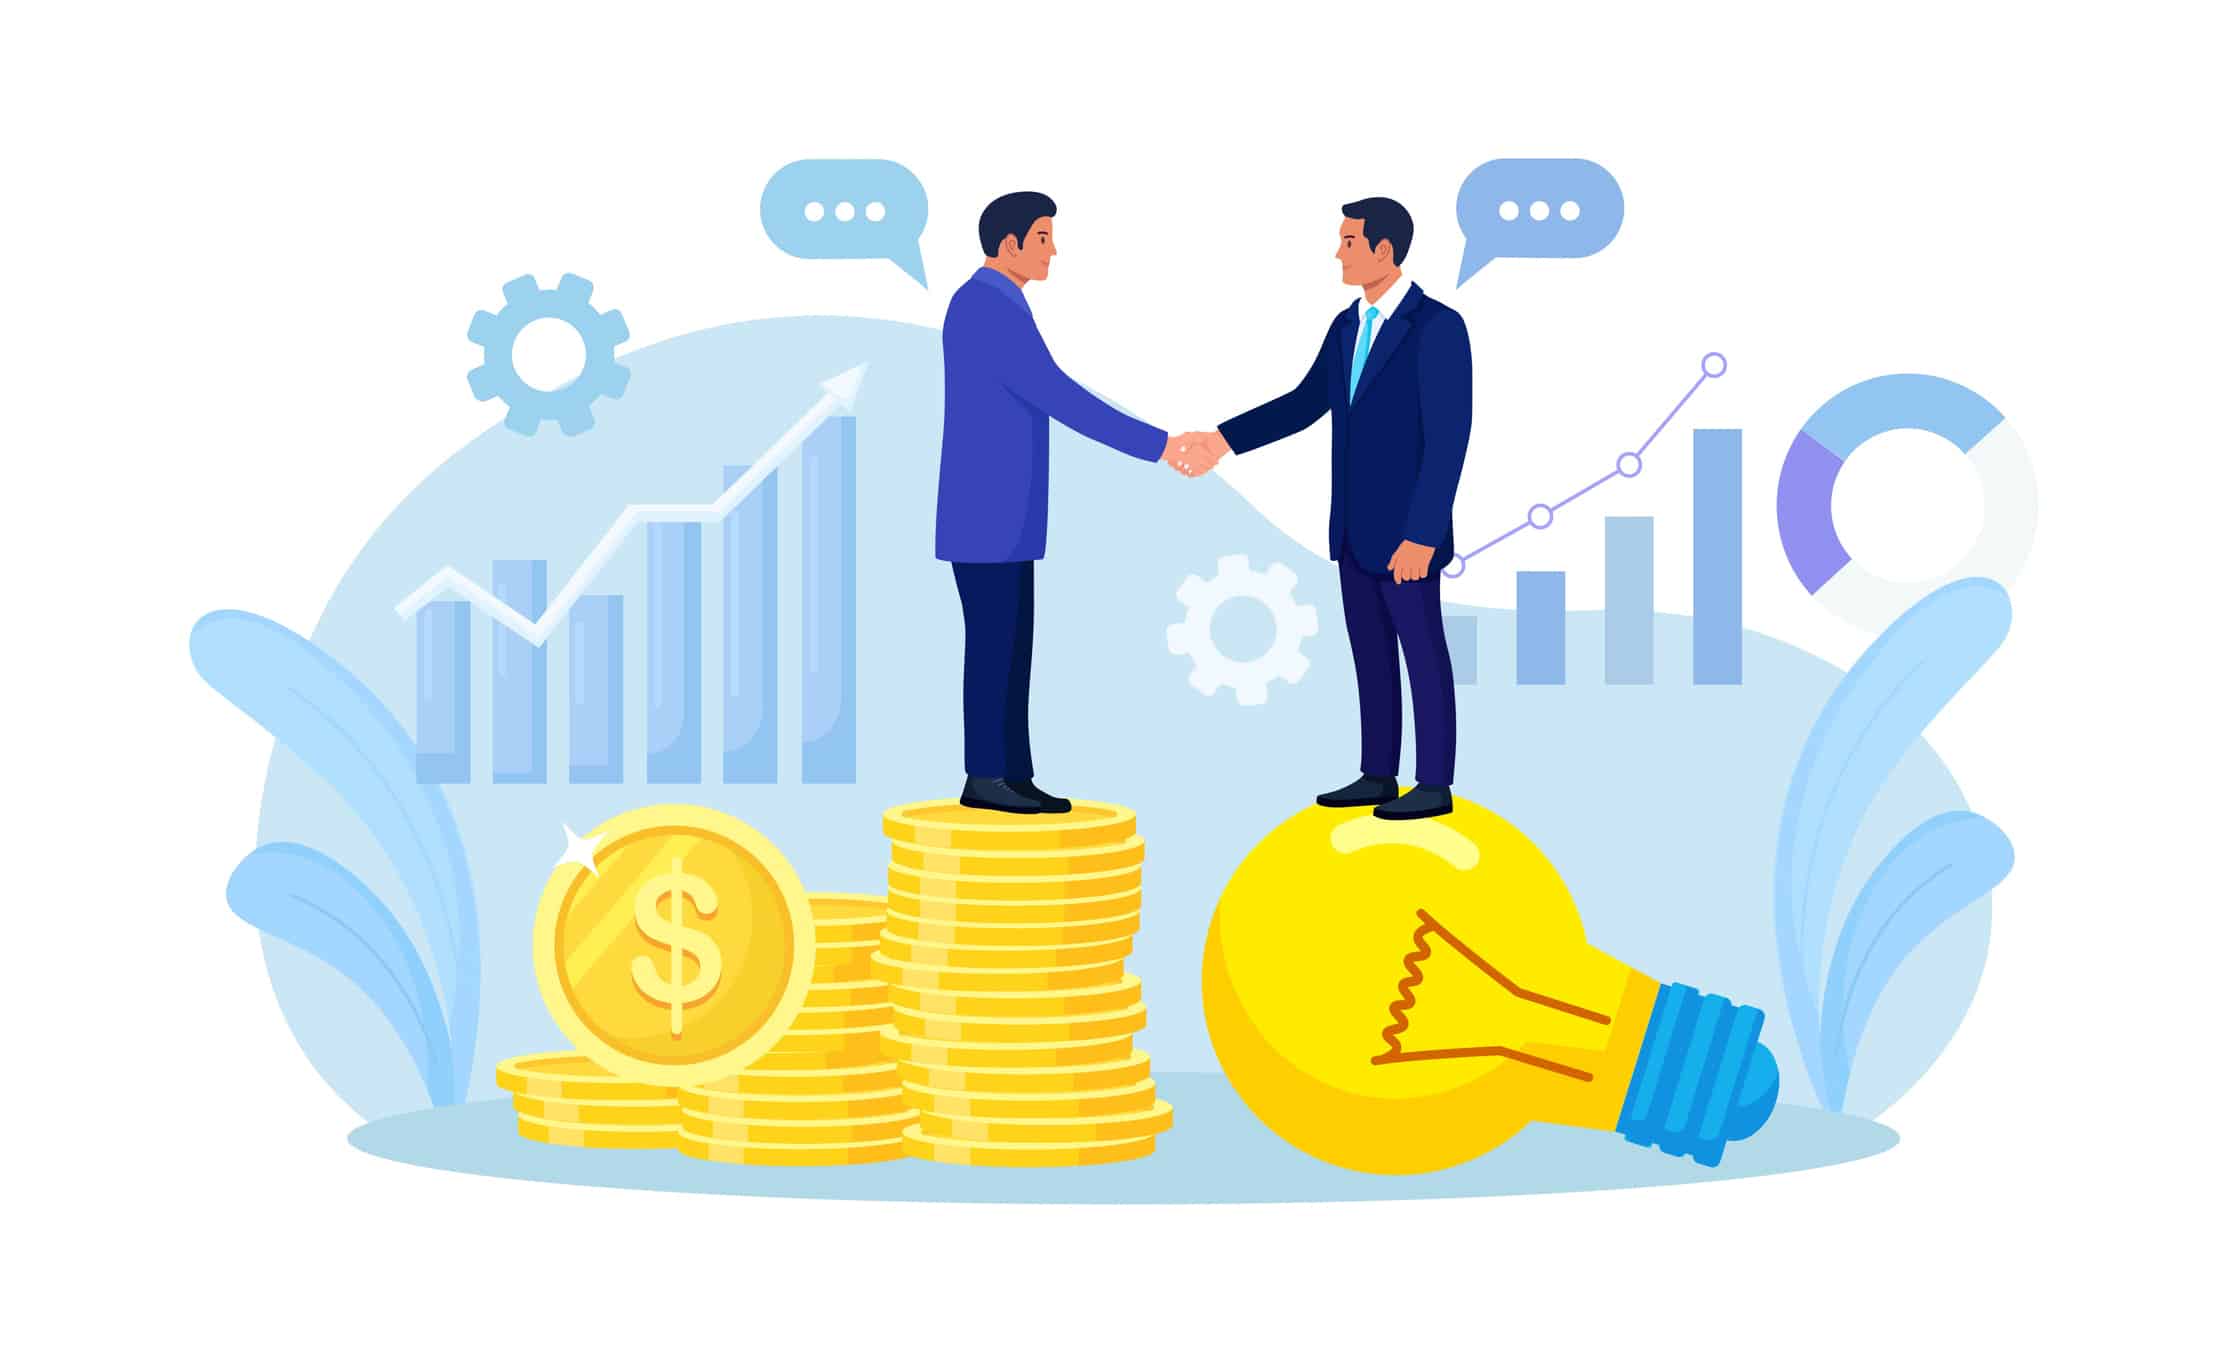 Entrepreneur businessman standing on lightbulb shaking hands with VC on money coins stack. Successful business negotiation, partnership. Selling startup business or merger agreement